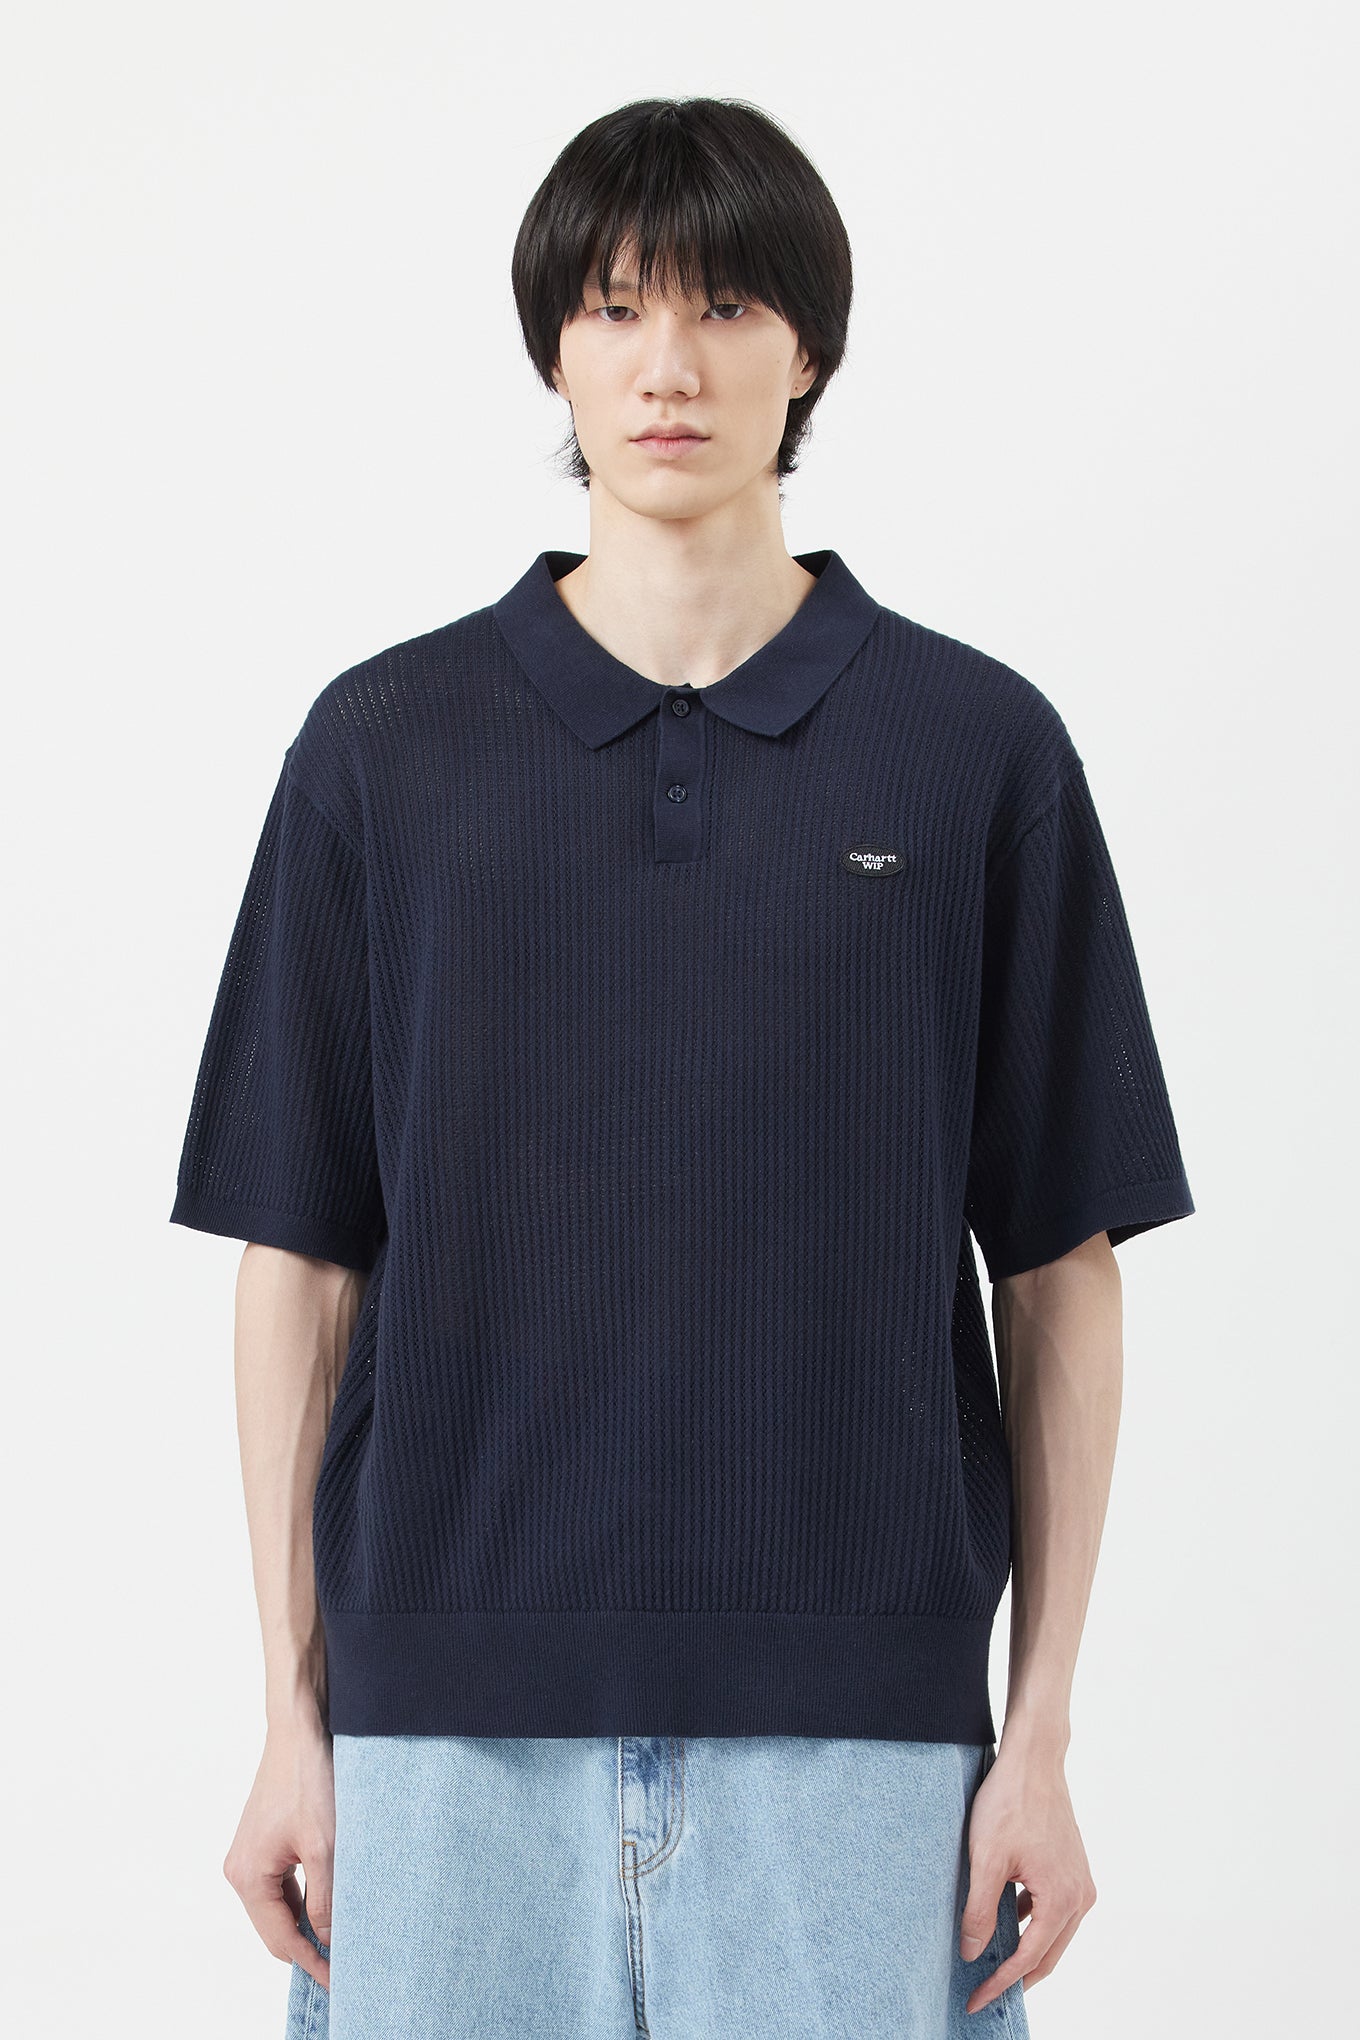 Carhartt Wip S/S Kenway Knit Polo-